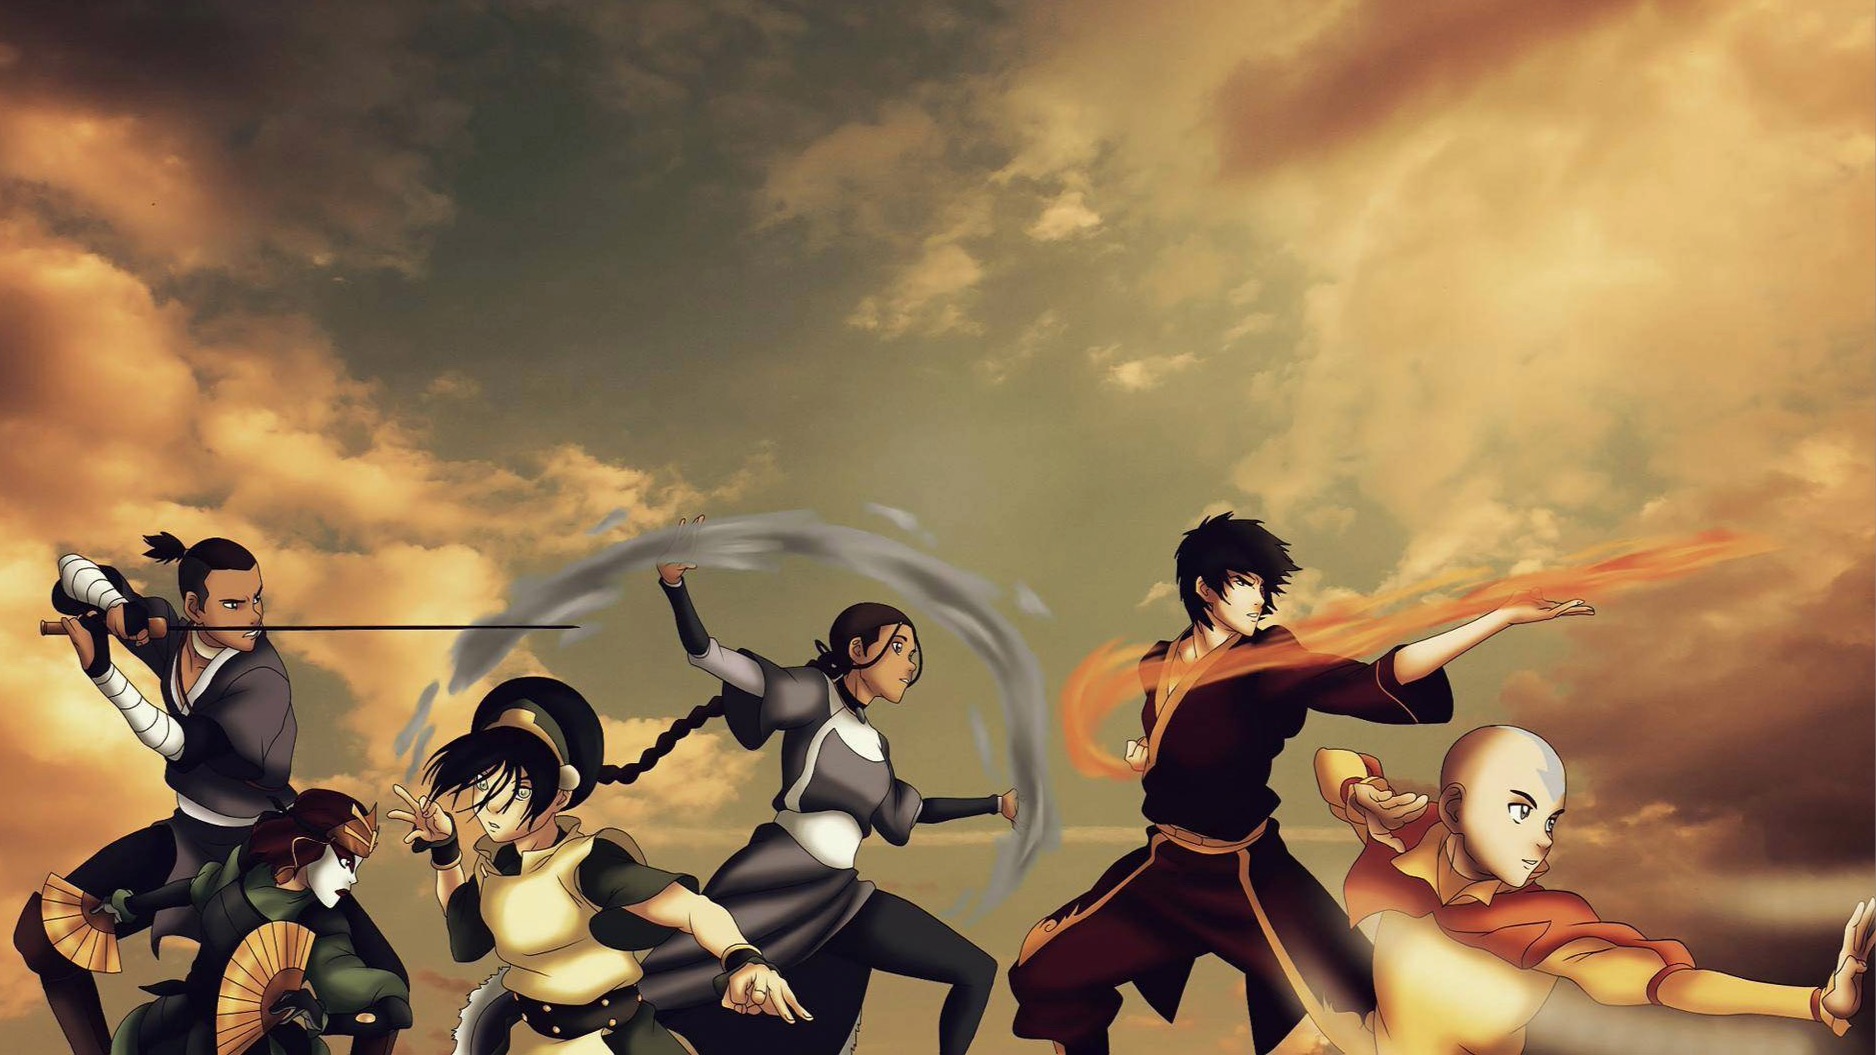 an image depicting Sokka, Suki, Toph, Katara, Zuko, and Aang from left to right; the heroes pose in various fighting stances against a backdrop of a cloudy sky